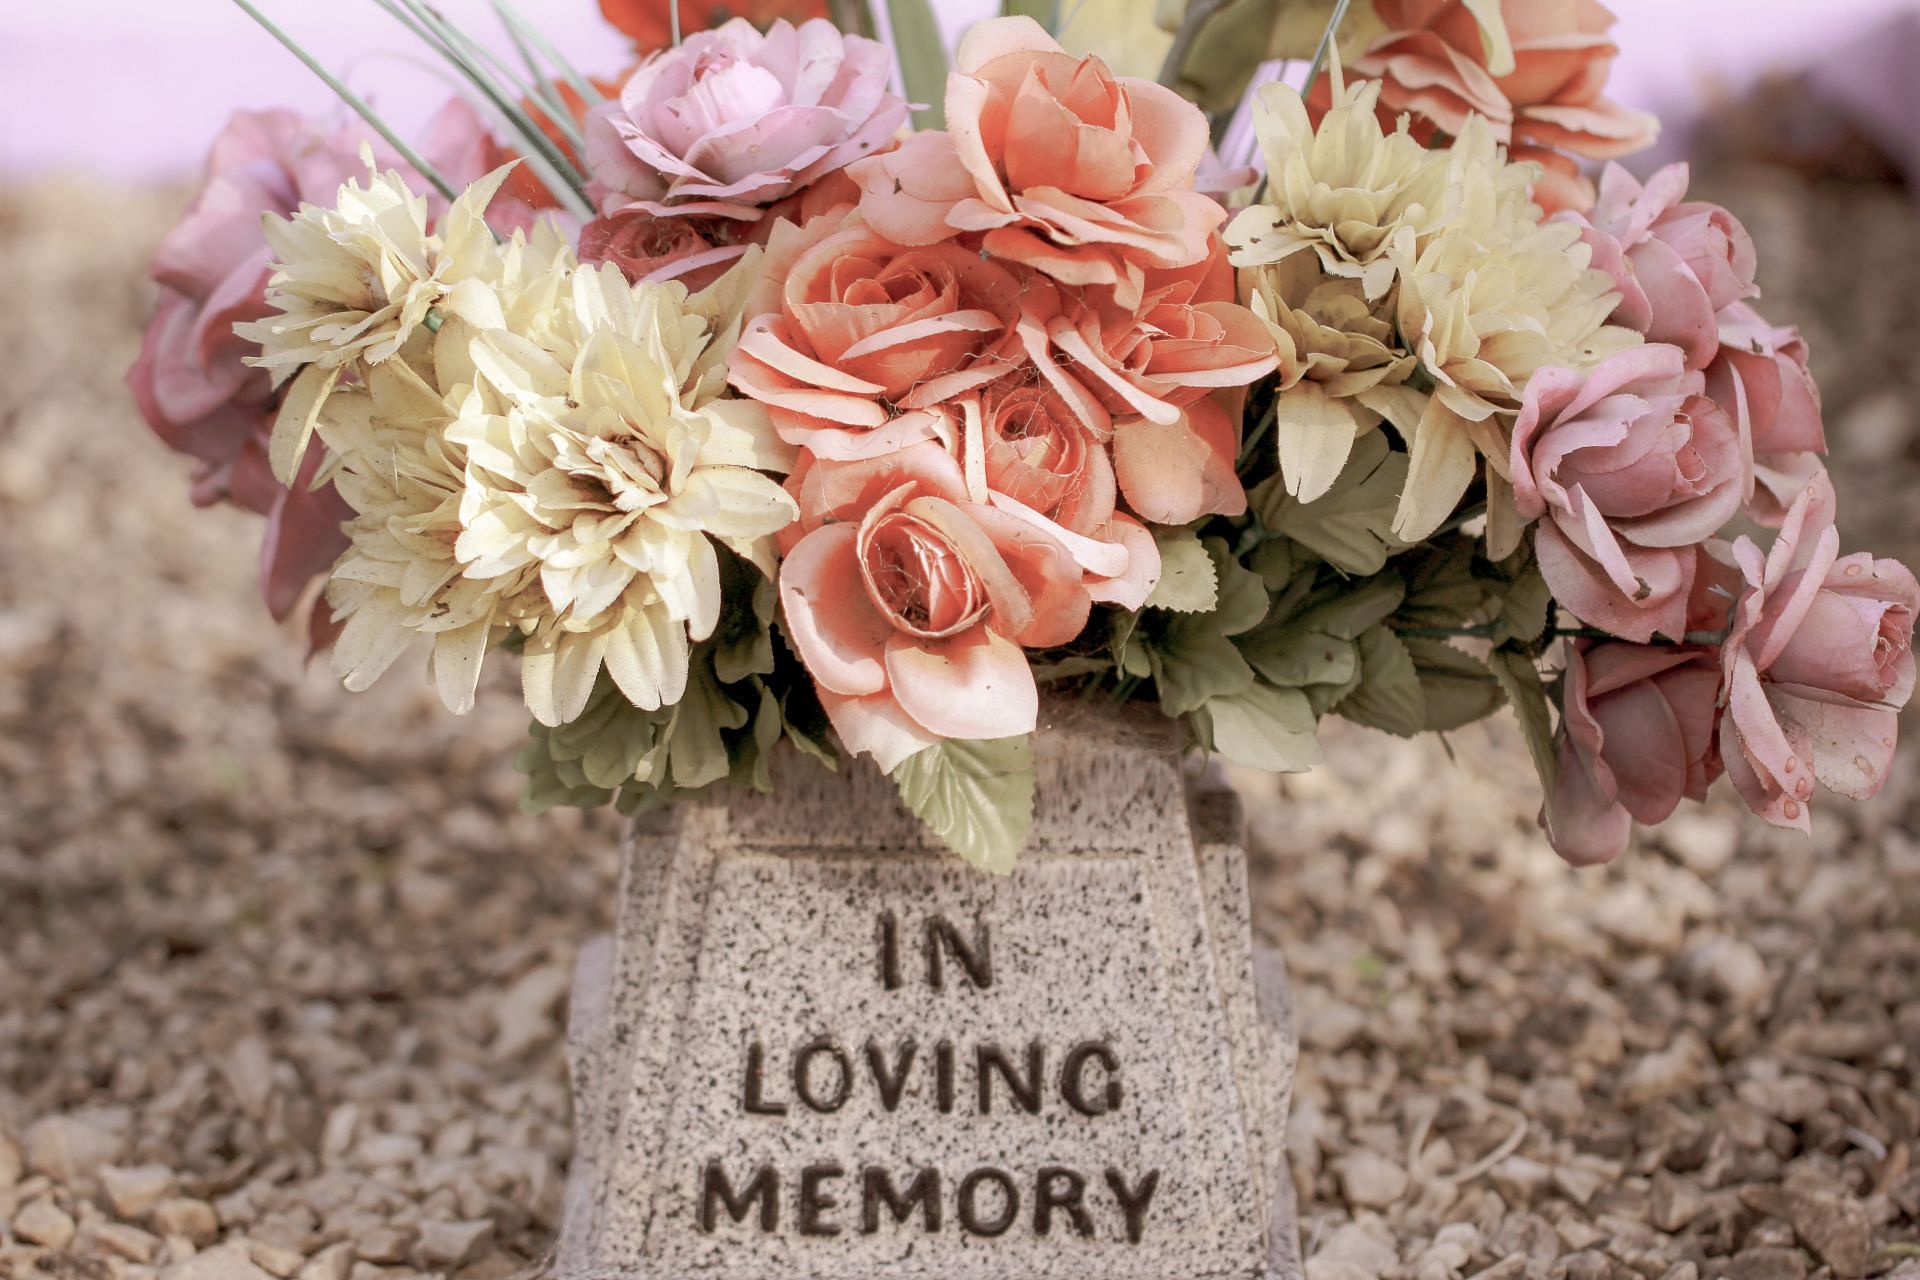 Grief and bereavement are personal. (Image via Pexels/Rodnae Productions)